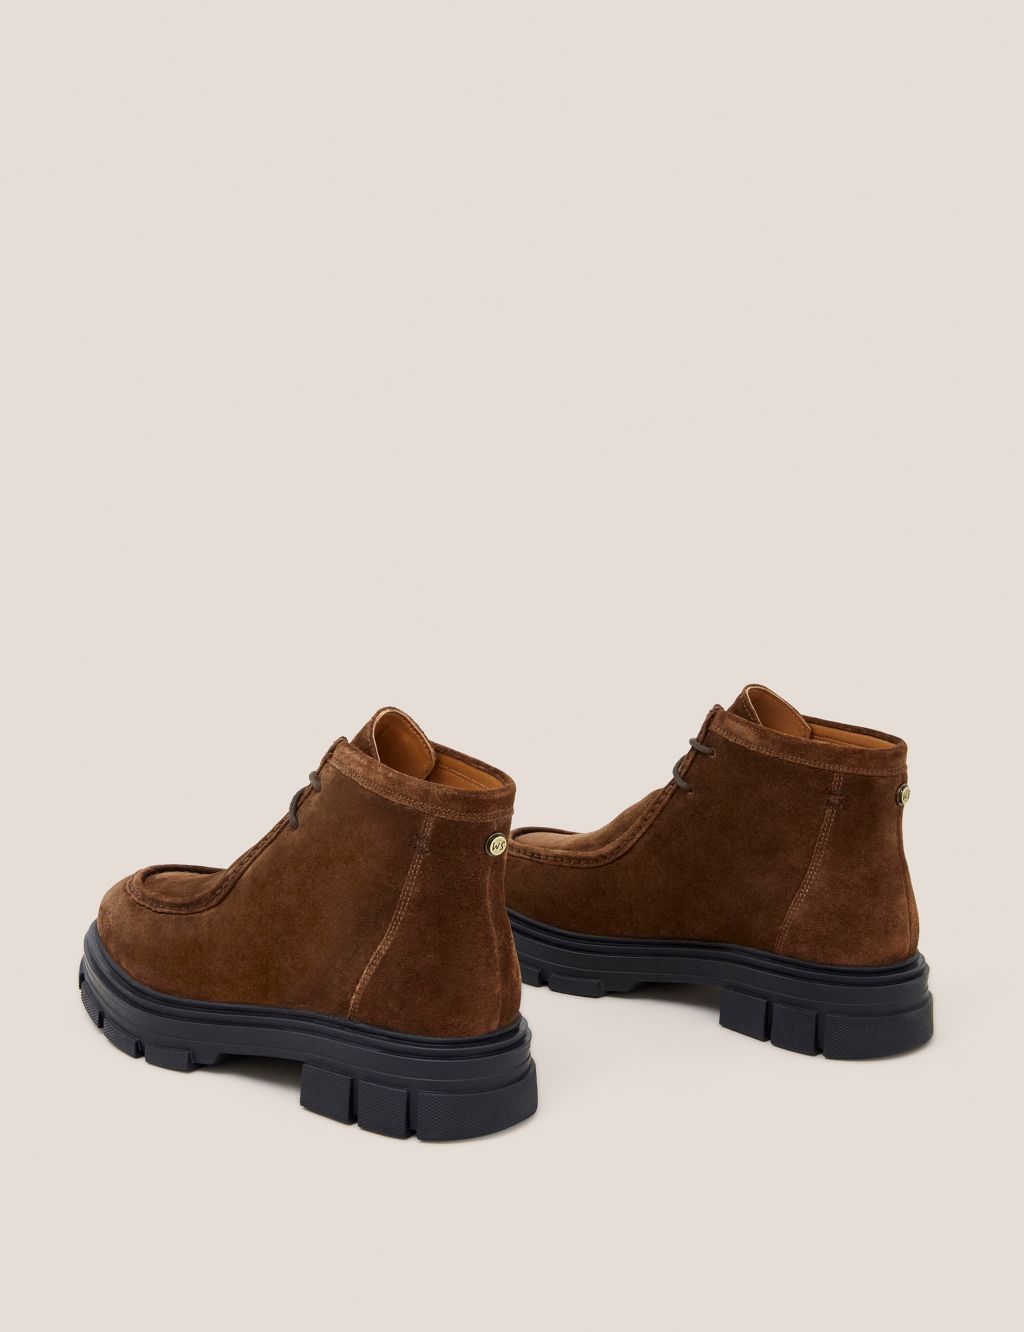 Suede Desert Boots image 3